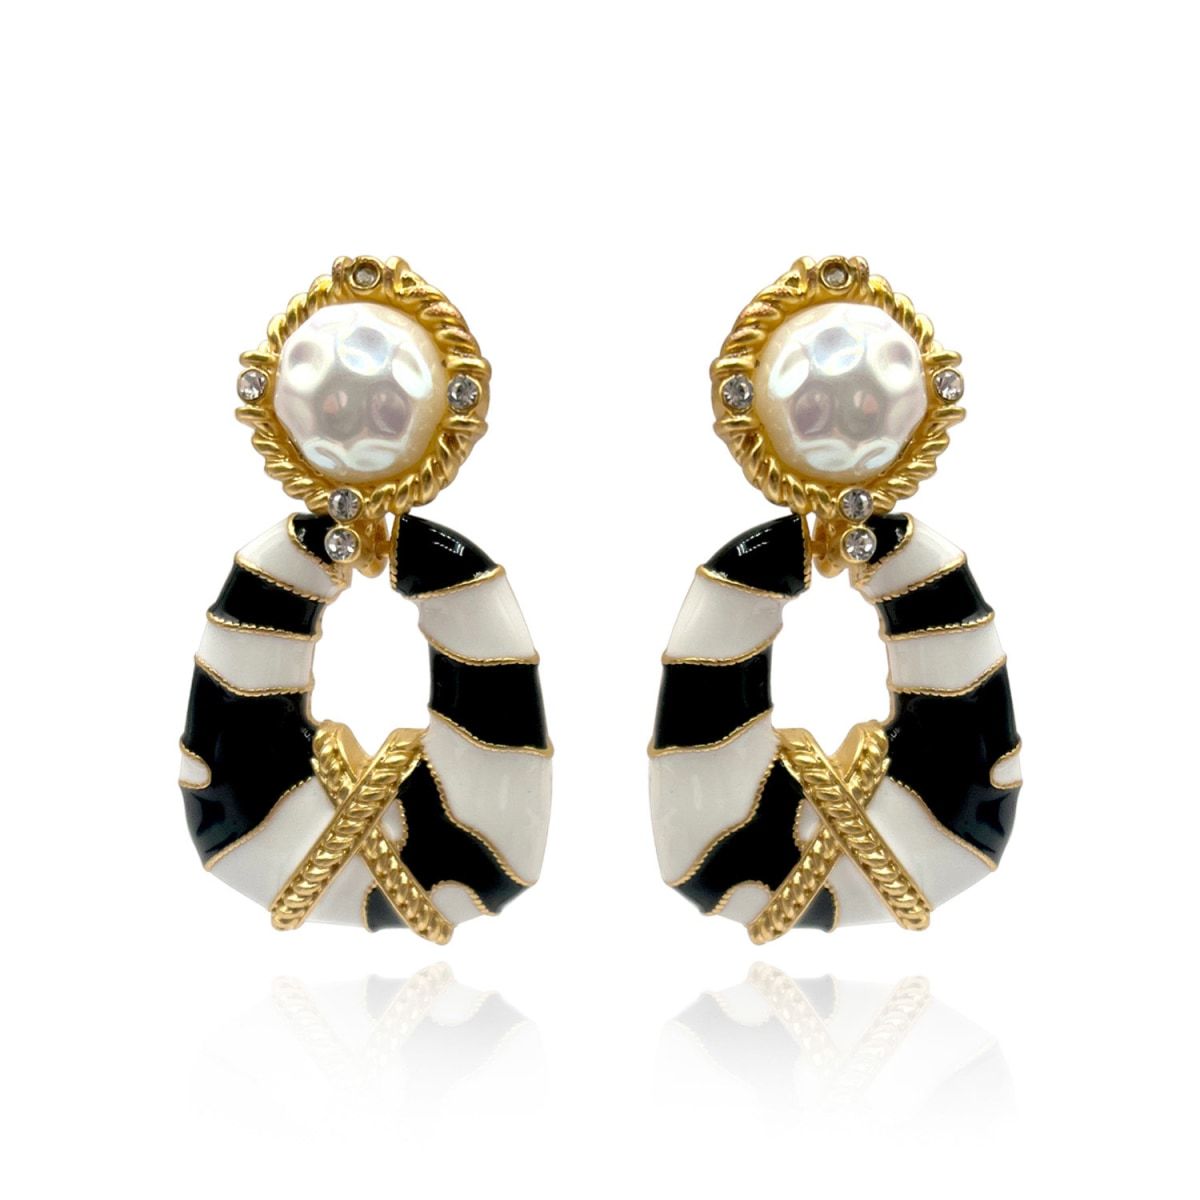 Clip On Doorknocker Earring With Pearl, Enamel, Gold, And Crystal Accents | Wolf & Badger (US)